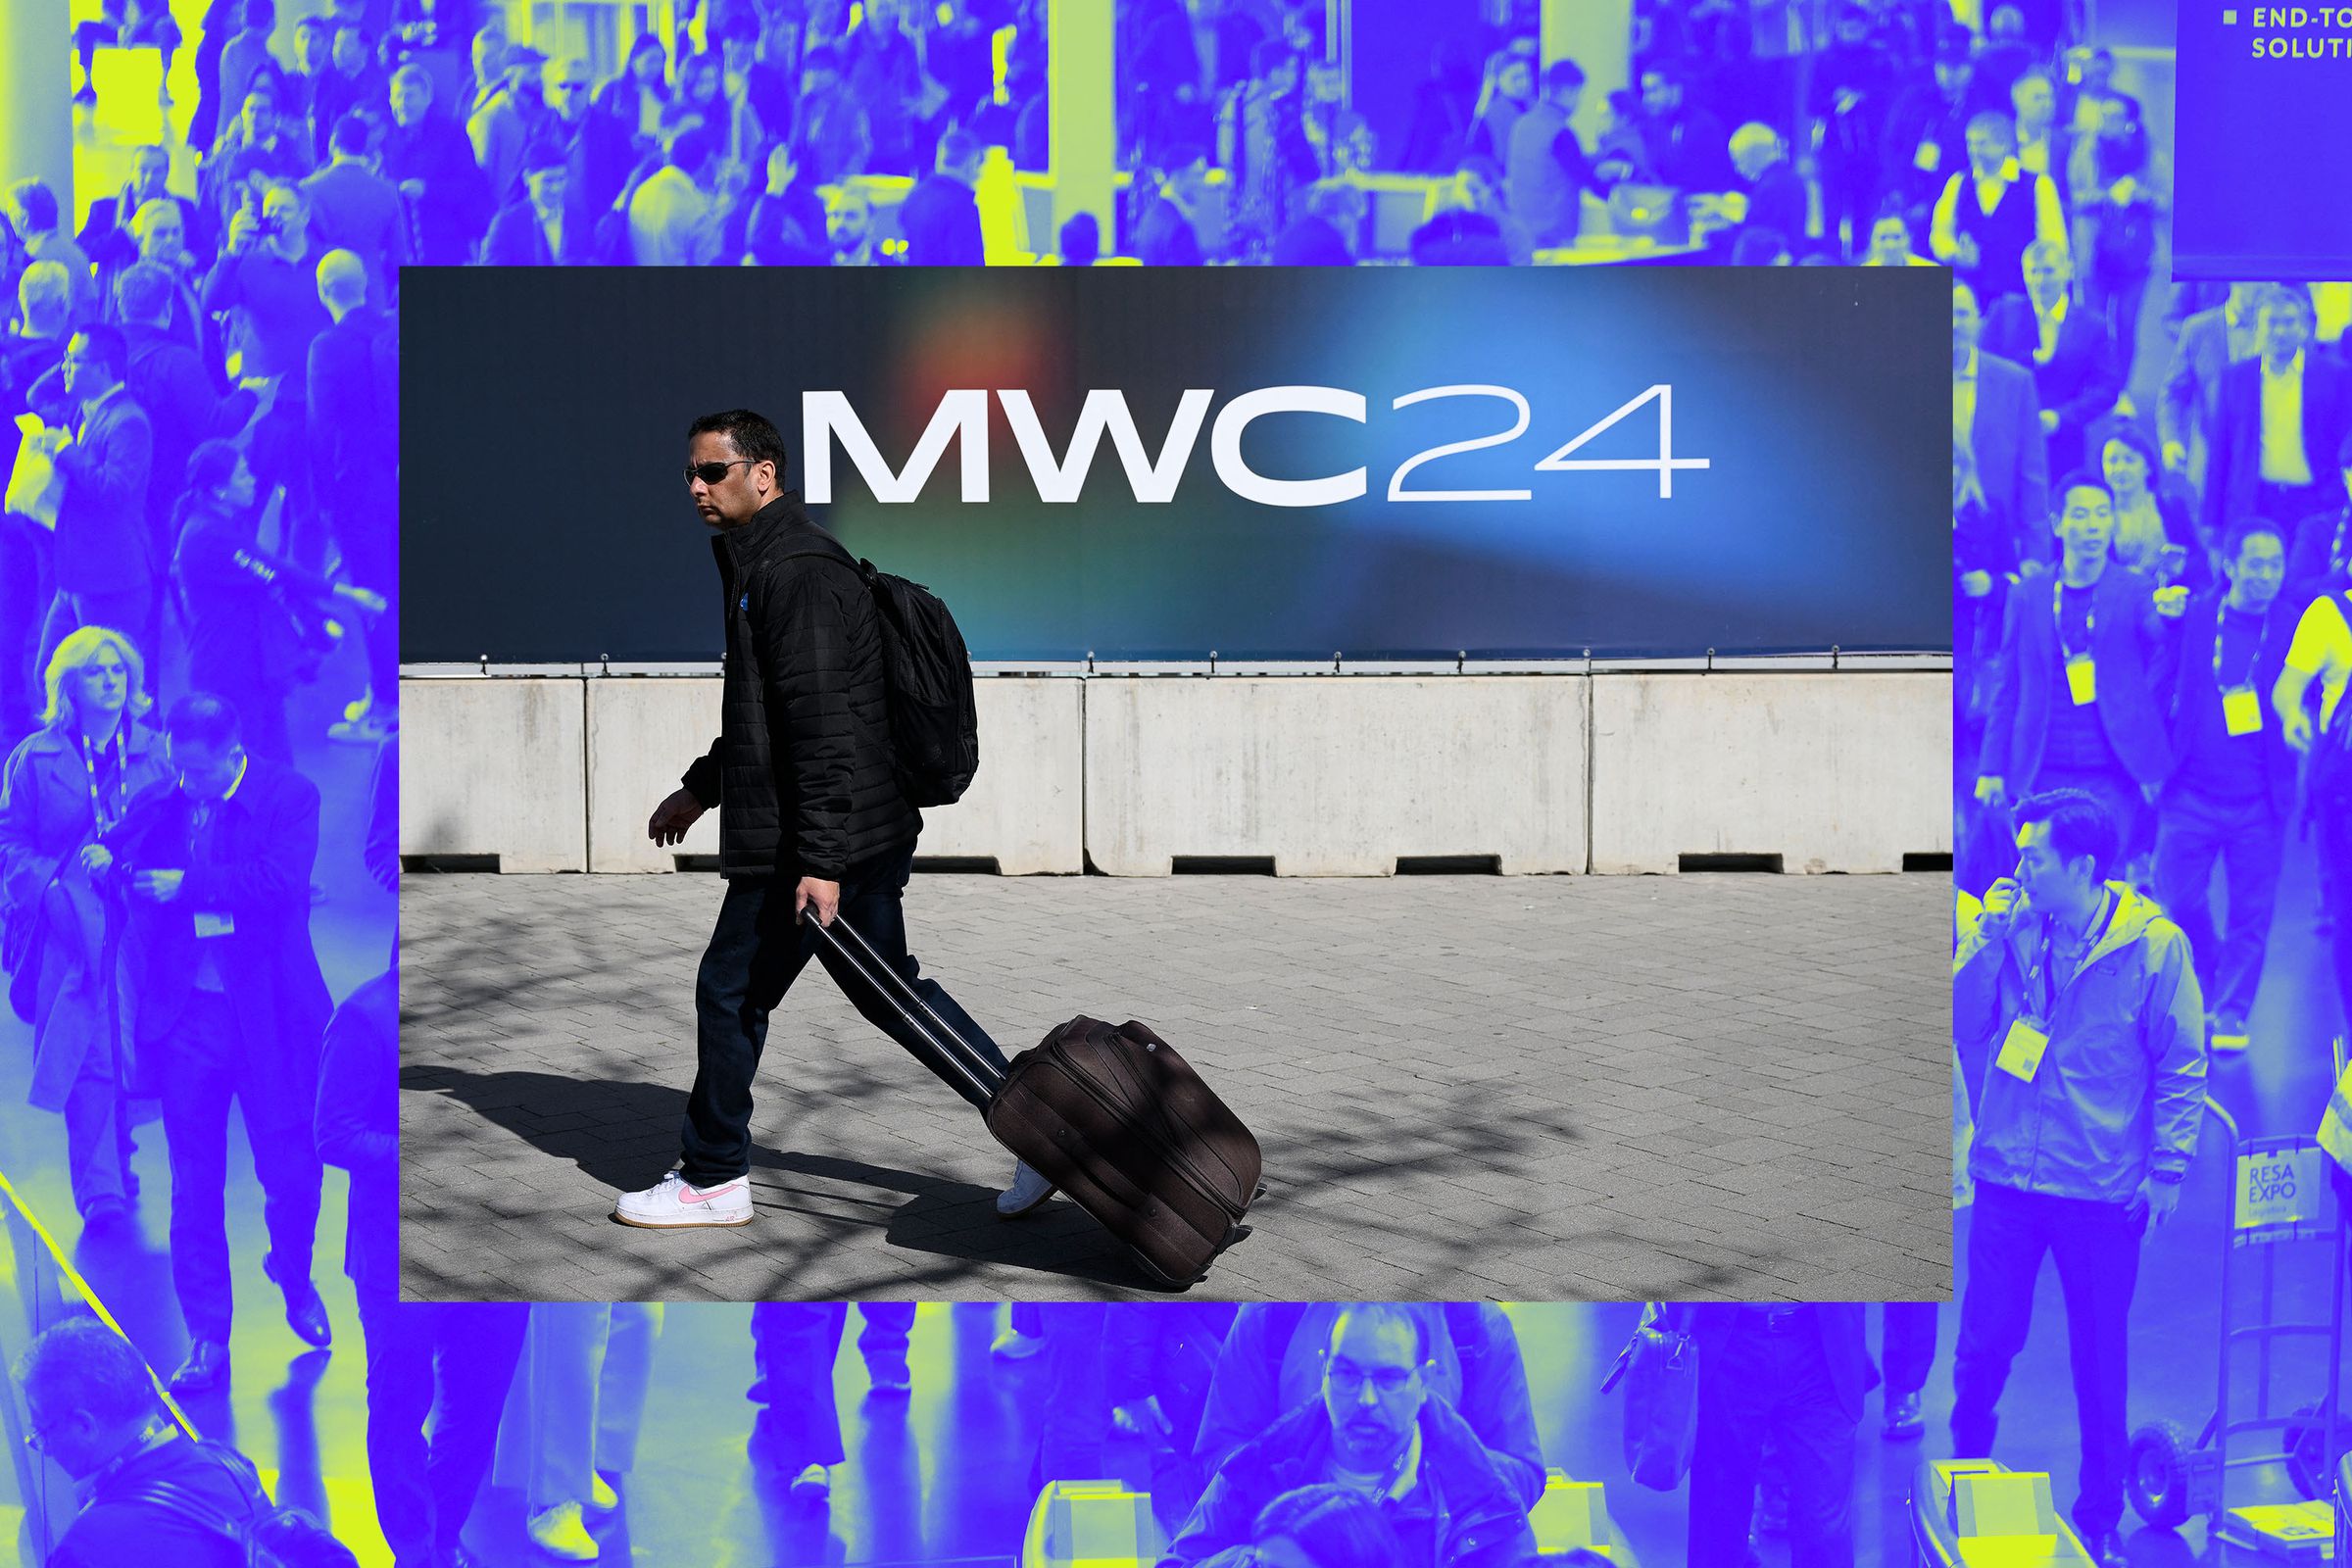 An image of a person walking with a MWC sign in the background.